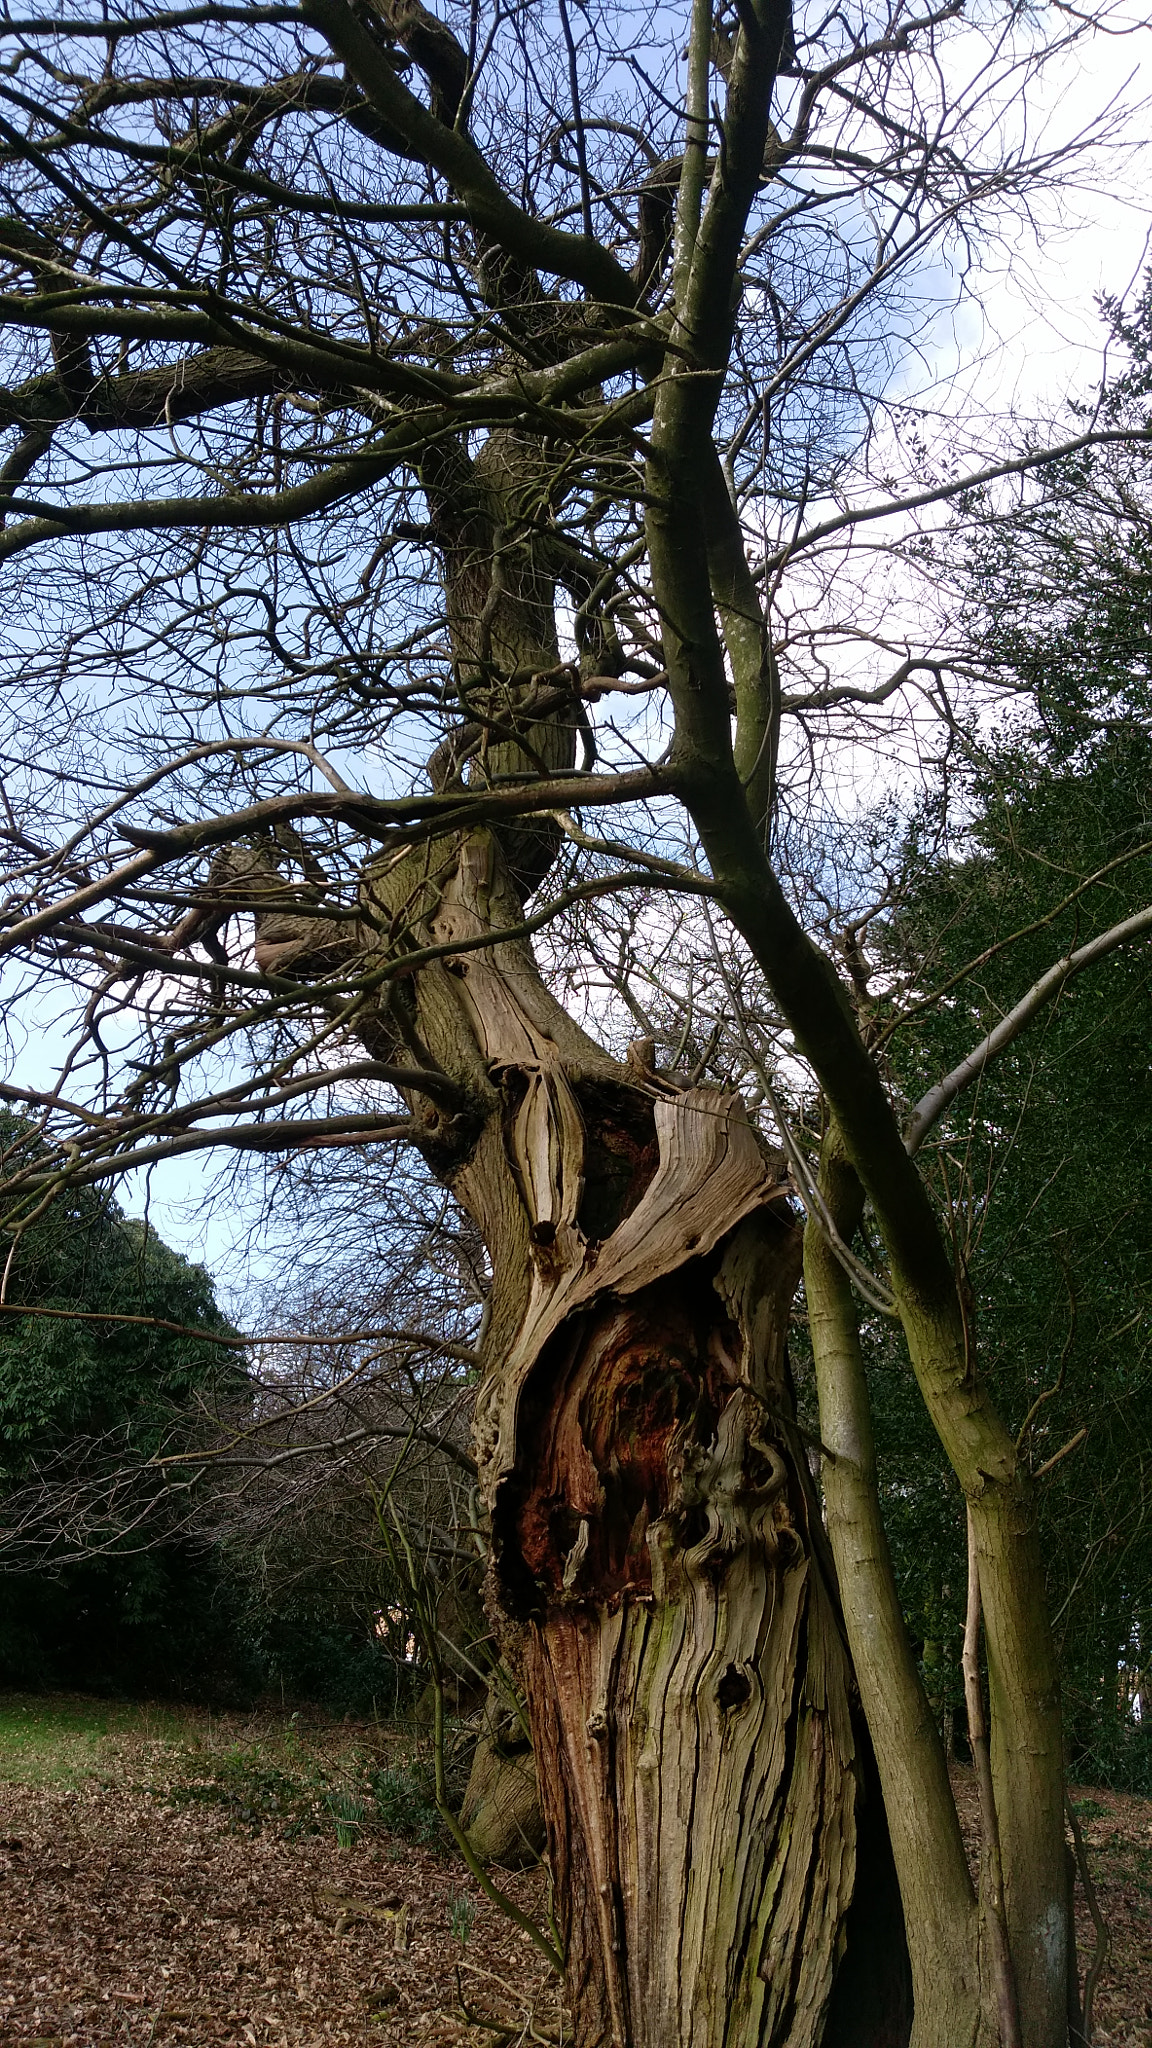 HTC ONE A9 sample photo. Wise old tree photography